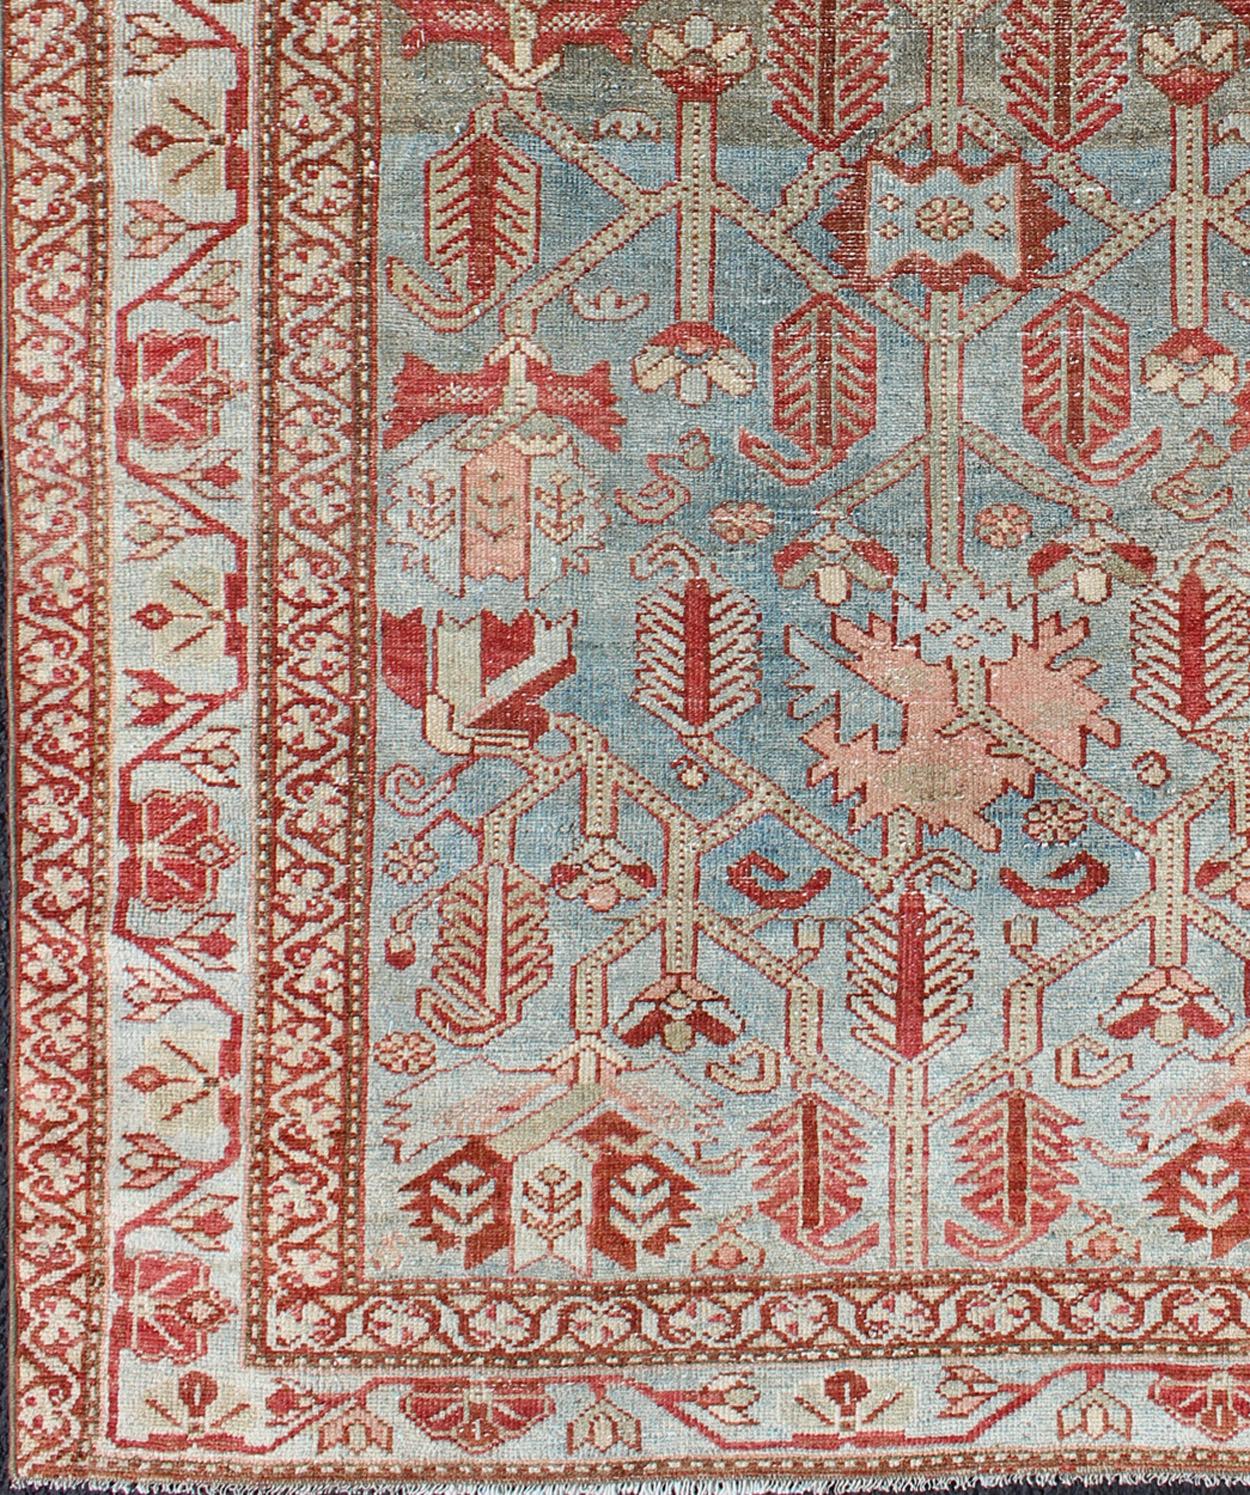 Energetic Persian Malayer antique rug with geometric motifs in shades of red and blue, rug en-176572, country of origin / type: Iran / Malayer, circa 1920.

This beautiful antique early 20th century Persian Malayer carpet features an all-over